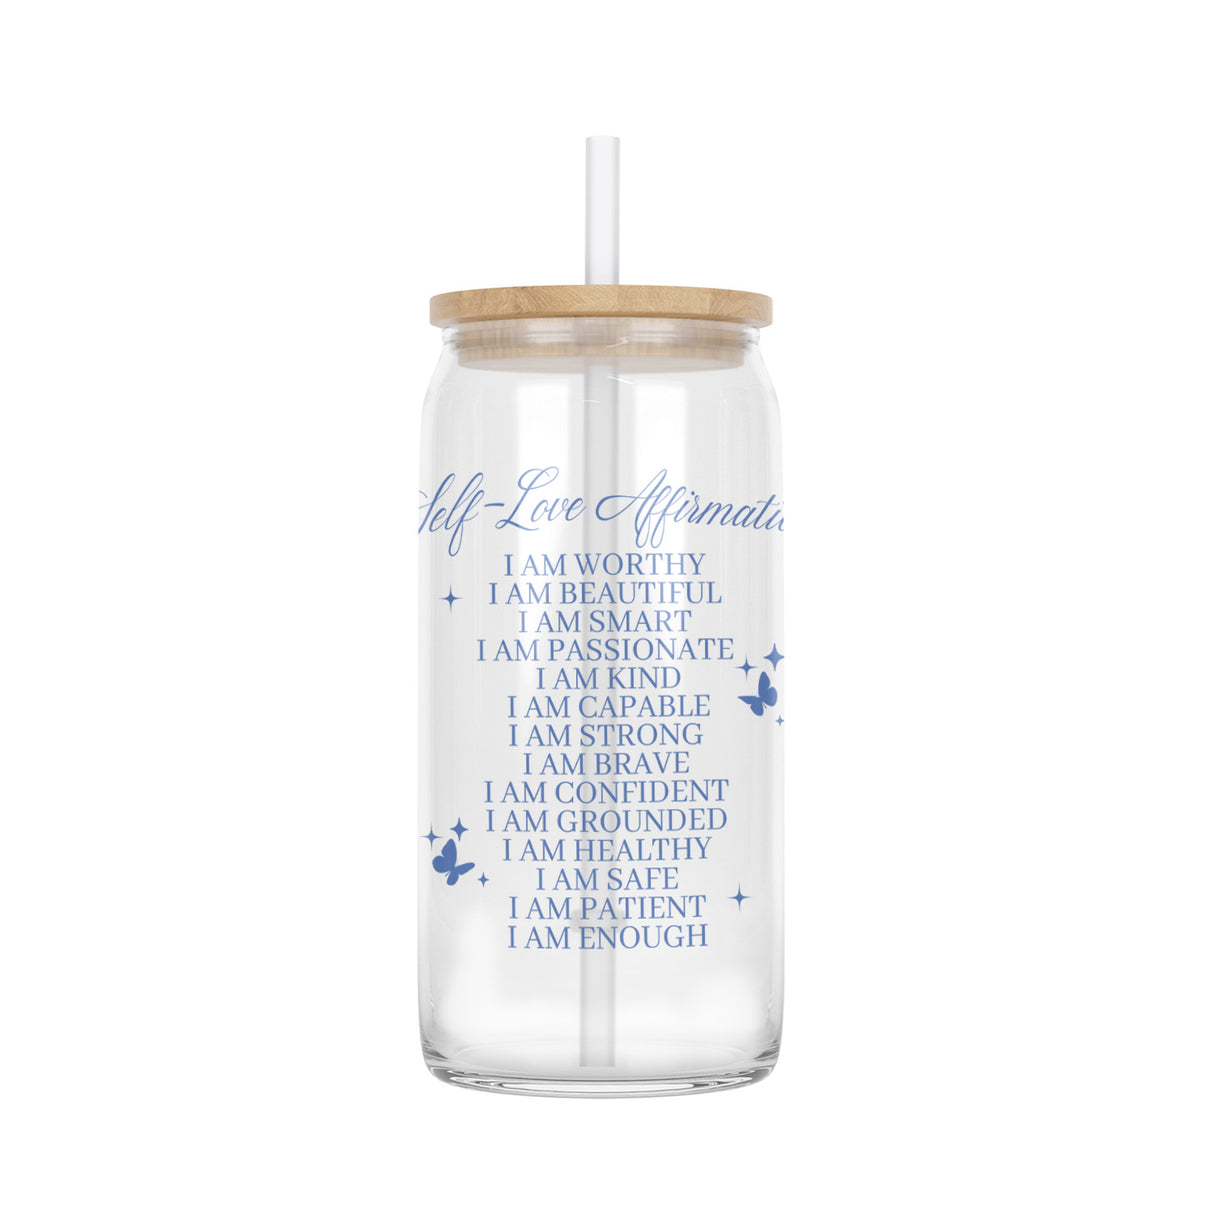 Clear glass can tumblers that can hold 16oz of your favorite drink.